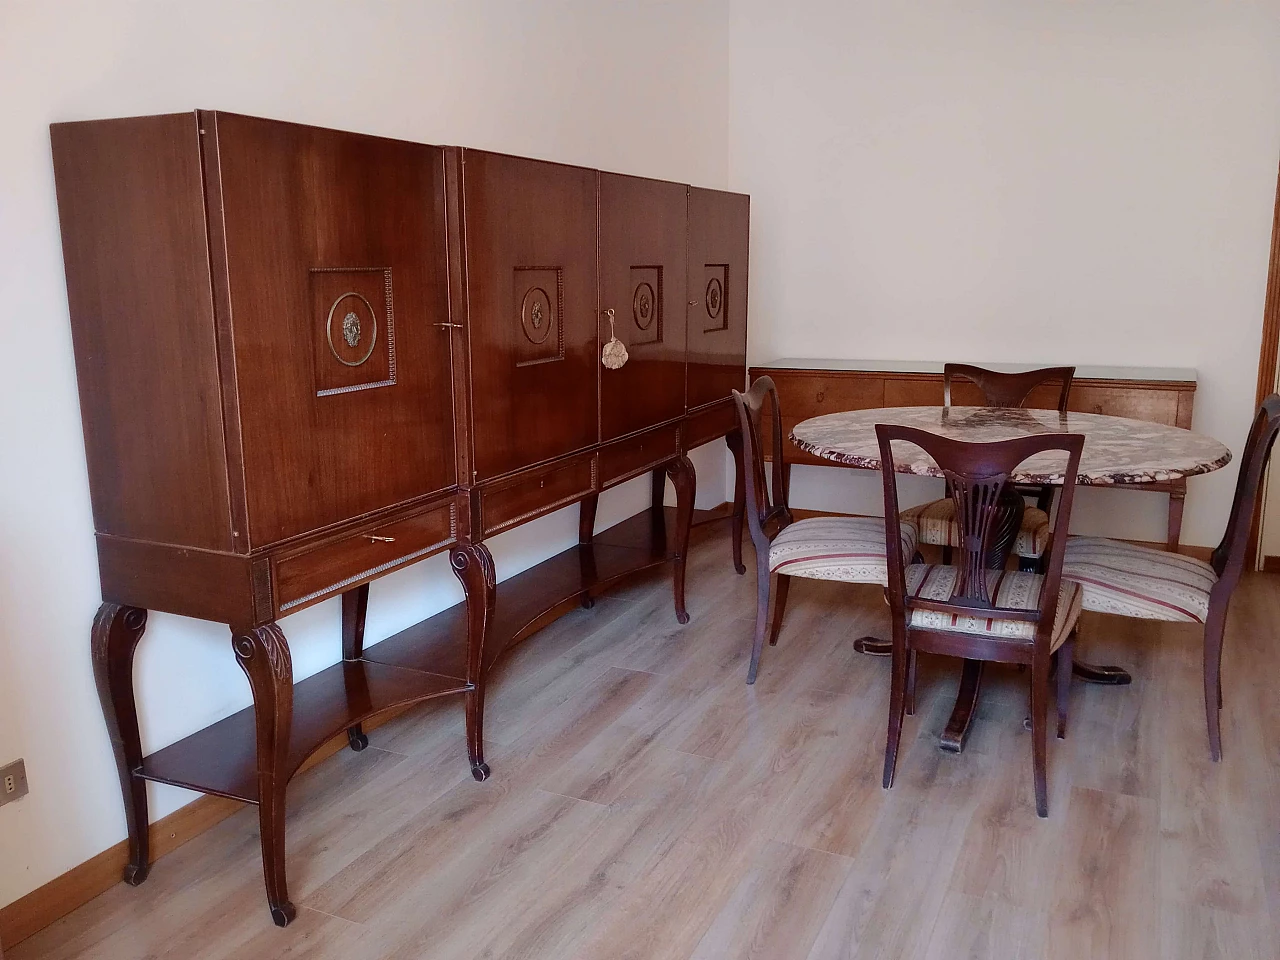 4 Mahogany chairs, sideboard and table with purple Calacatta marble top by Fratelli Barni Mobili d'Arte Seveso, 1950s 1